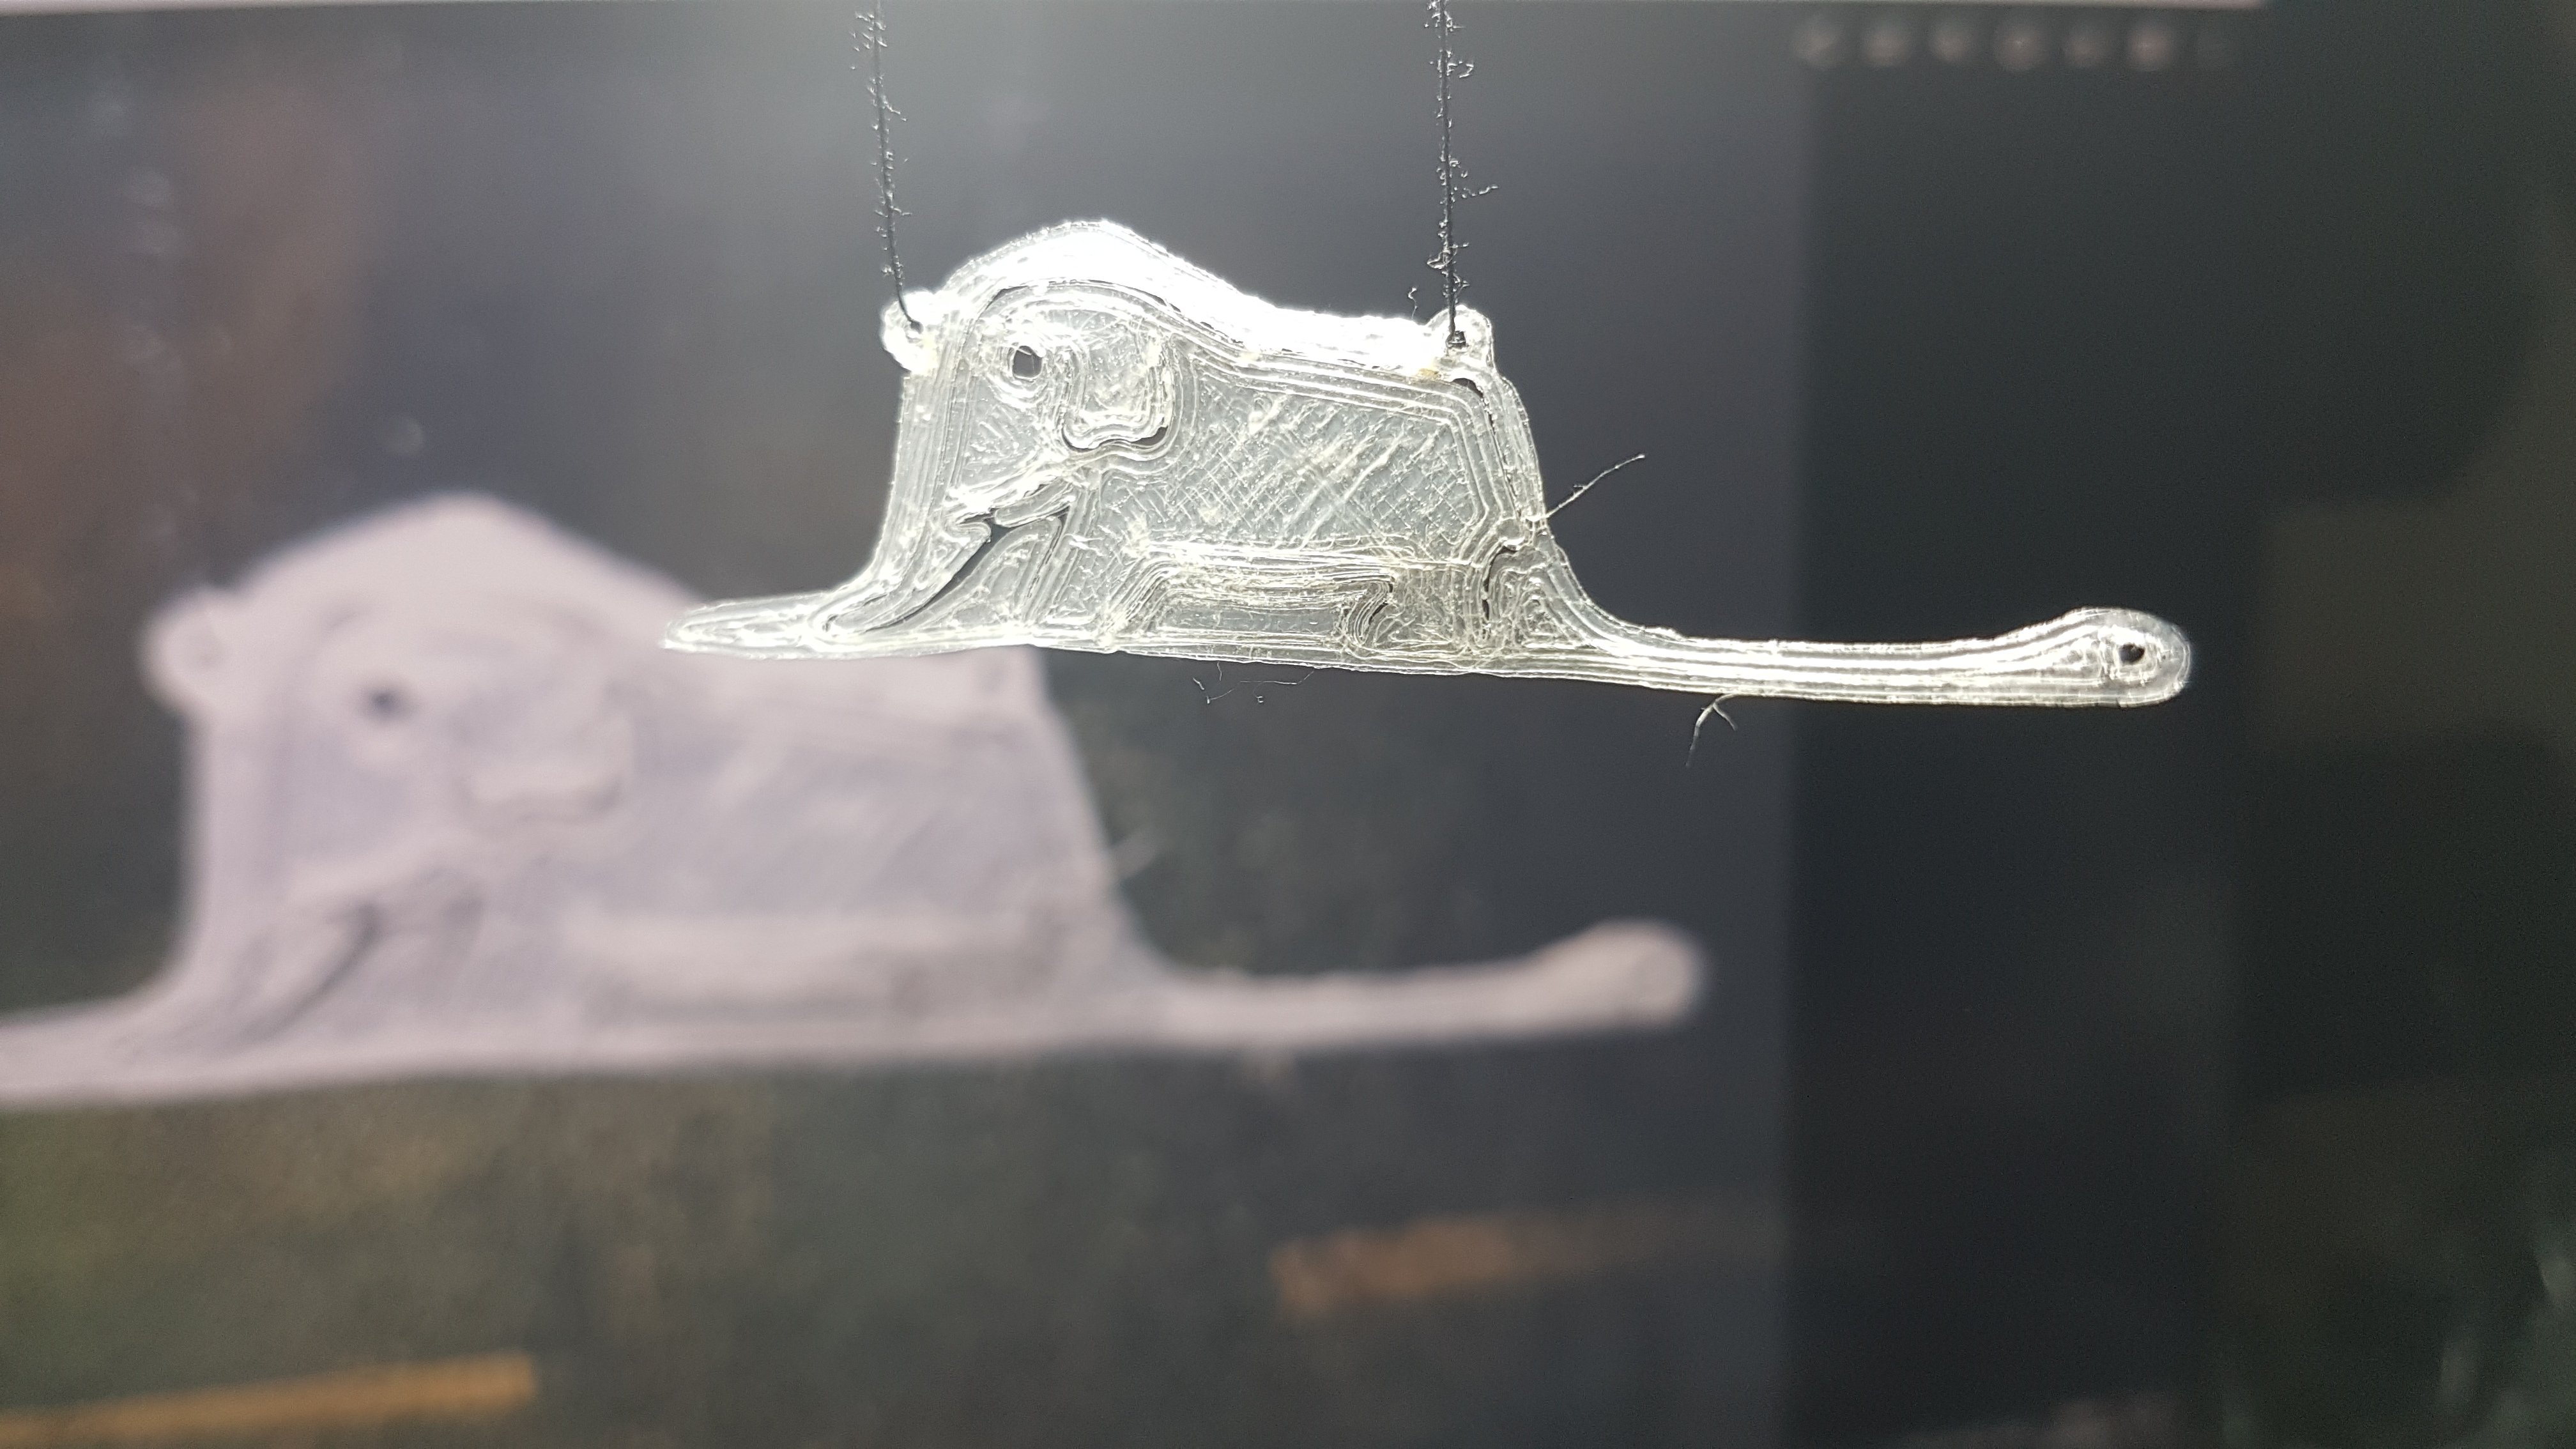 Pendant-boa constrictor who has swallowed an elephant 'Little Prince'